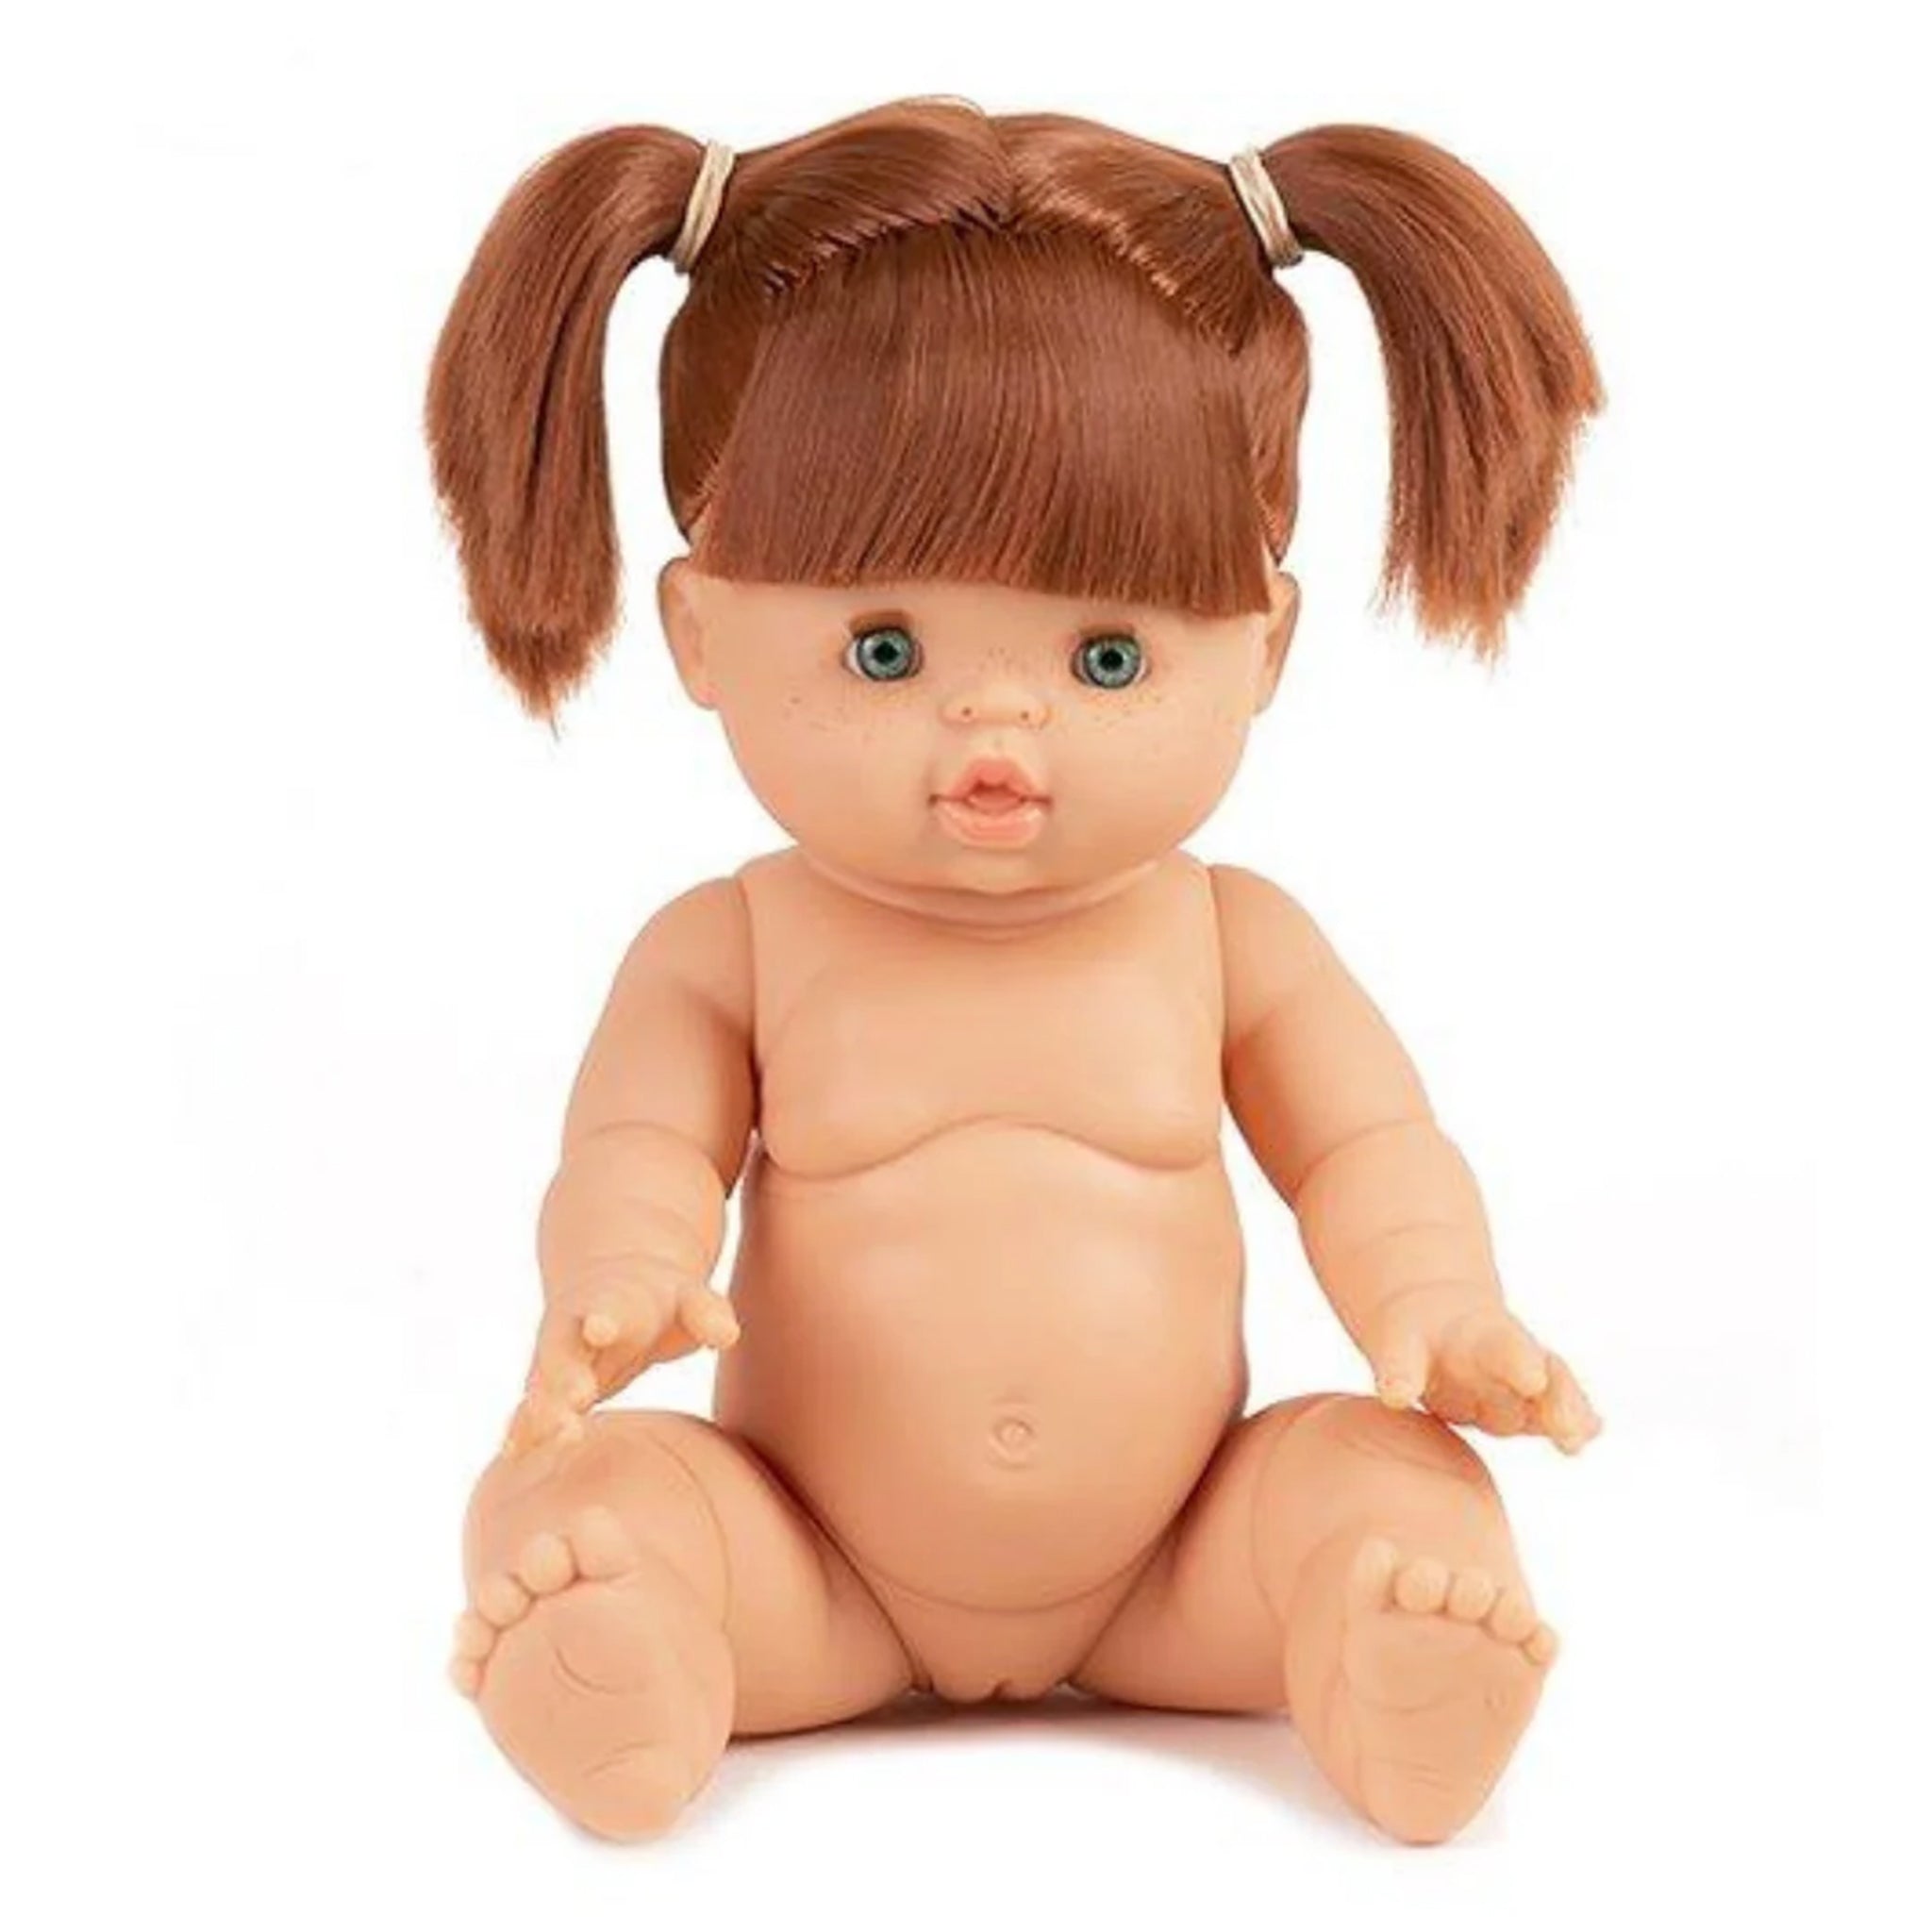 A baby doll with red hair in pigtails, green eyes and freckles. 